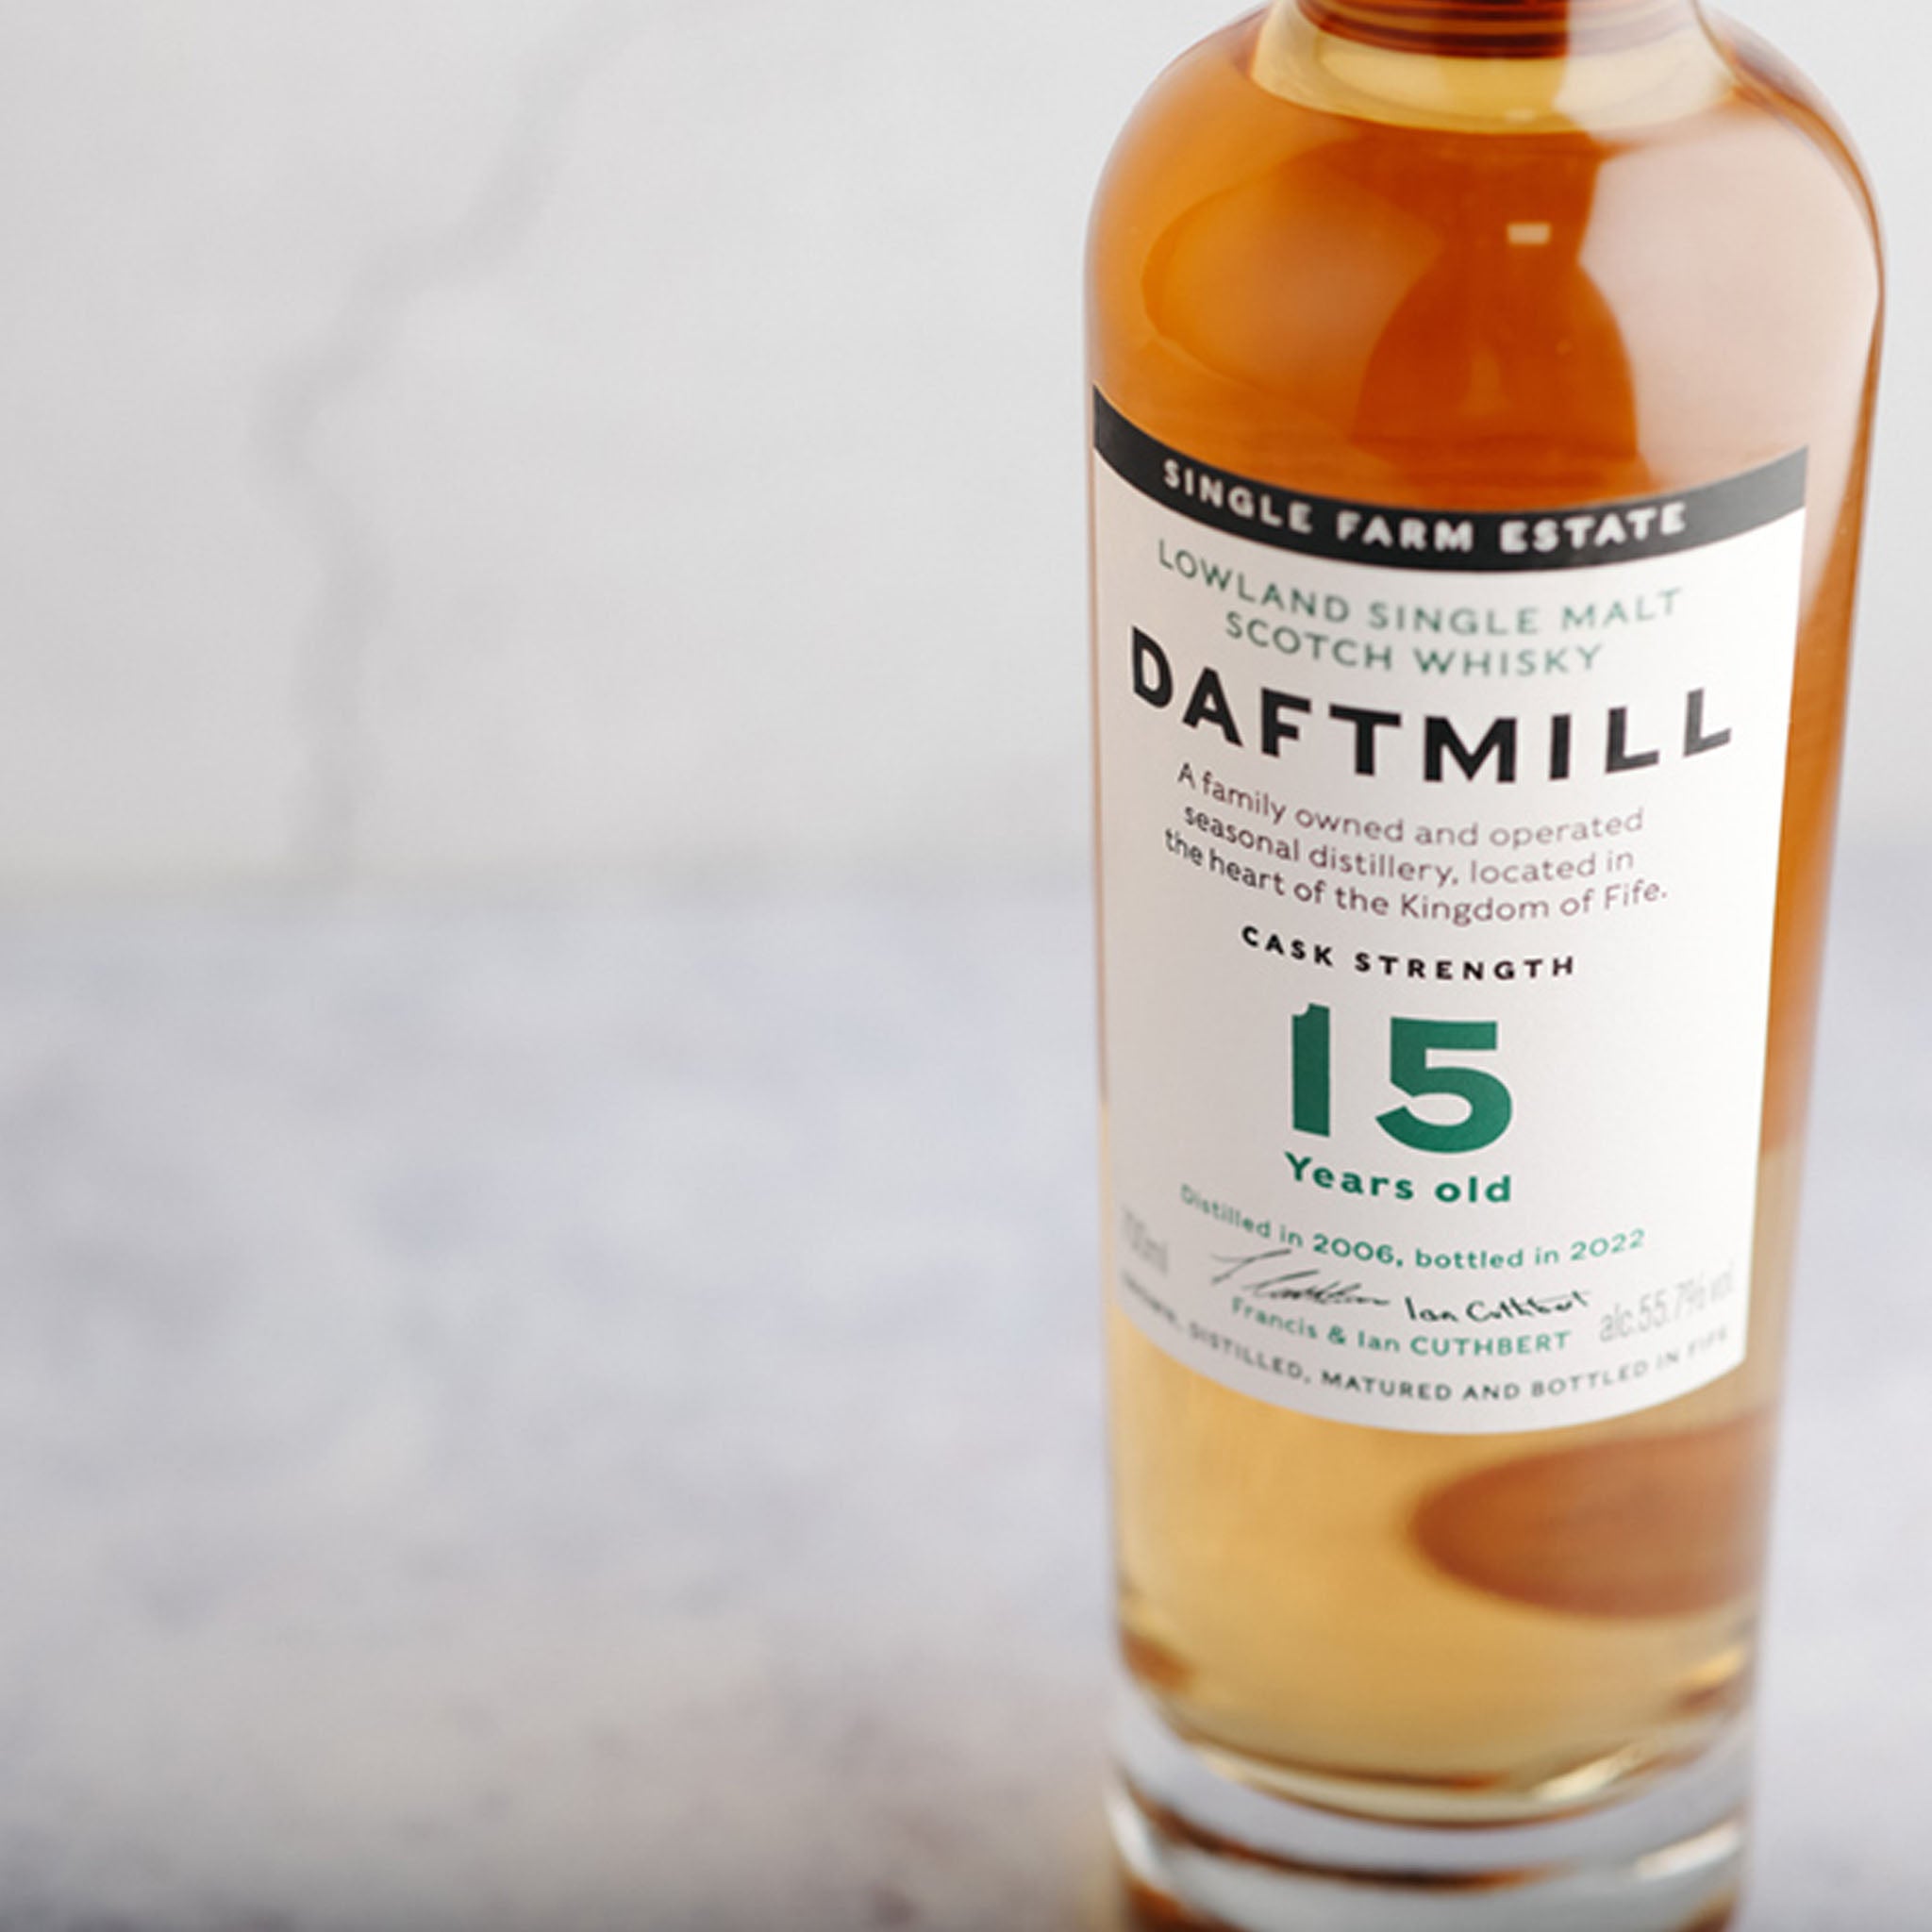 Coming Soon: Daftmill 15-Year-Old Cask Strength!